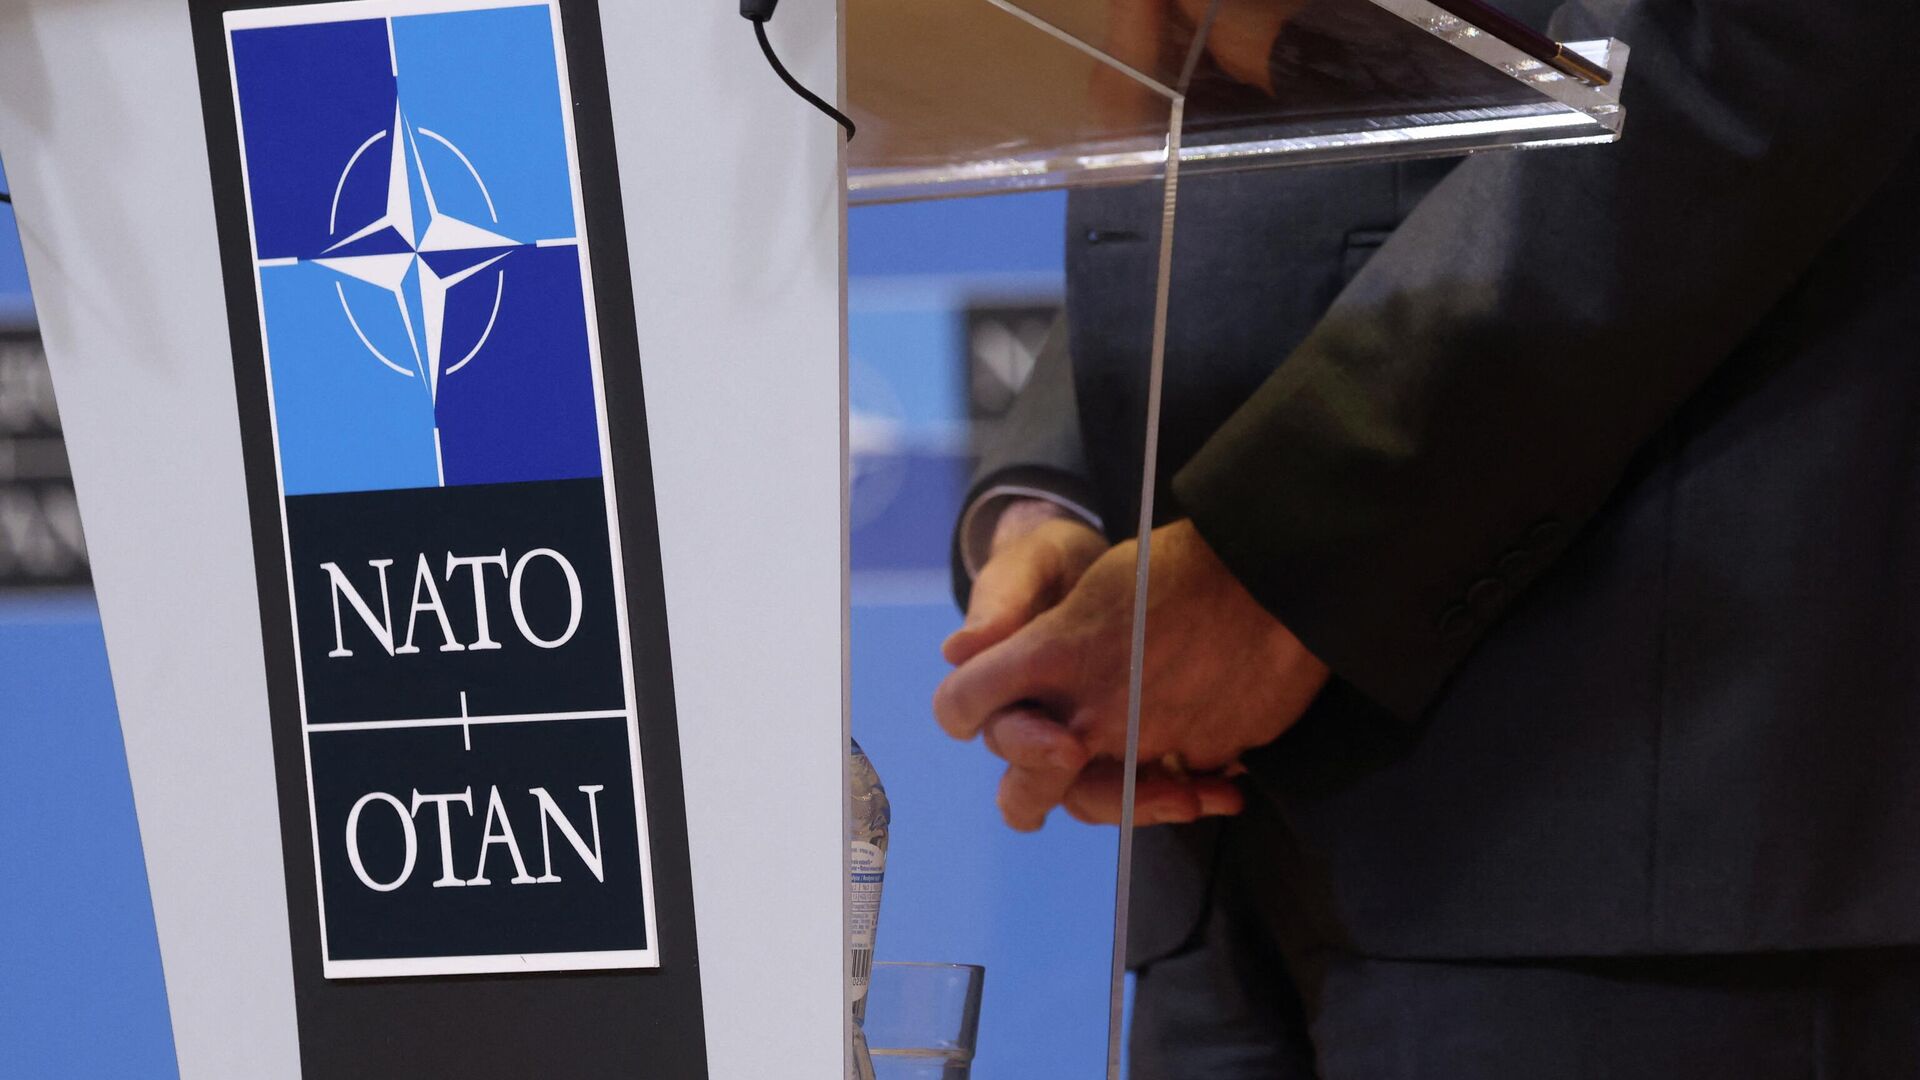 The hands of U.S. Secretary of State Antony Blinken are seen as he speaks to the media after a NATO foreign ministers meeting, amid Russia's invasion of Ukraine, next to the logo of NATO at its headquarters in Brussels, Belgium April 7, 2022 - Sputnik International, 1920, 11.04.2022